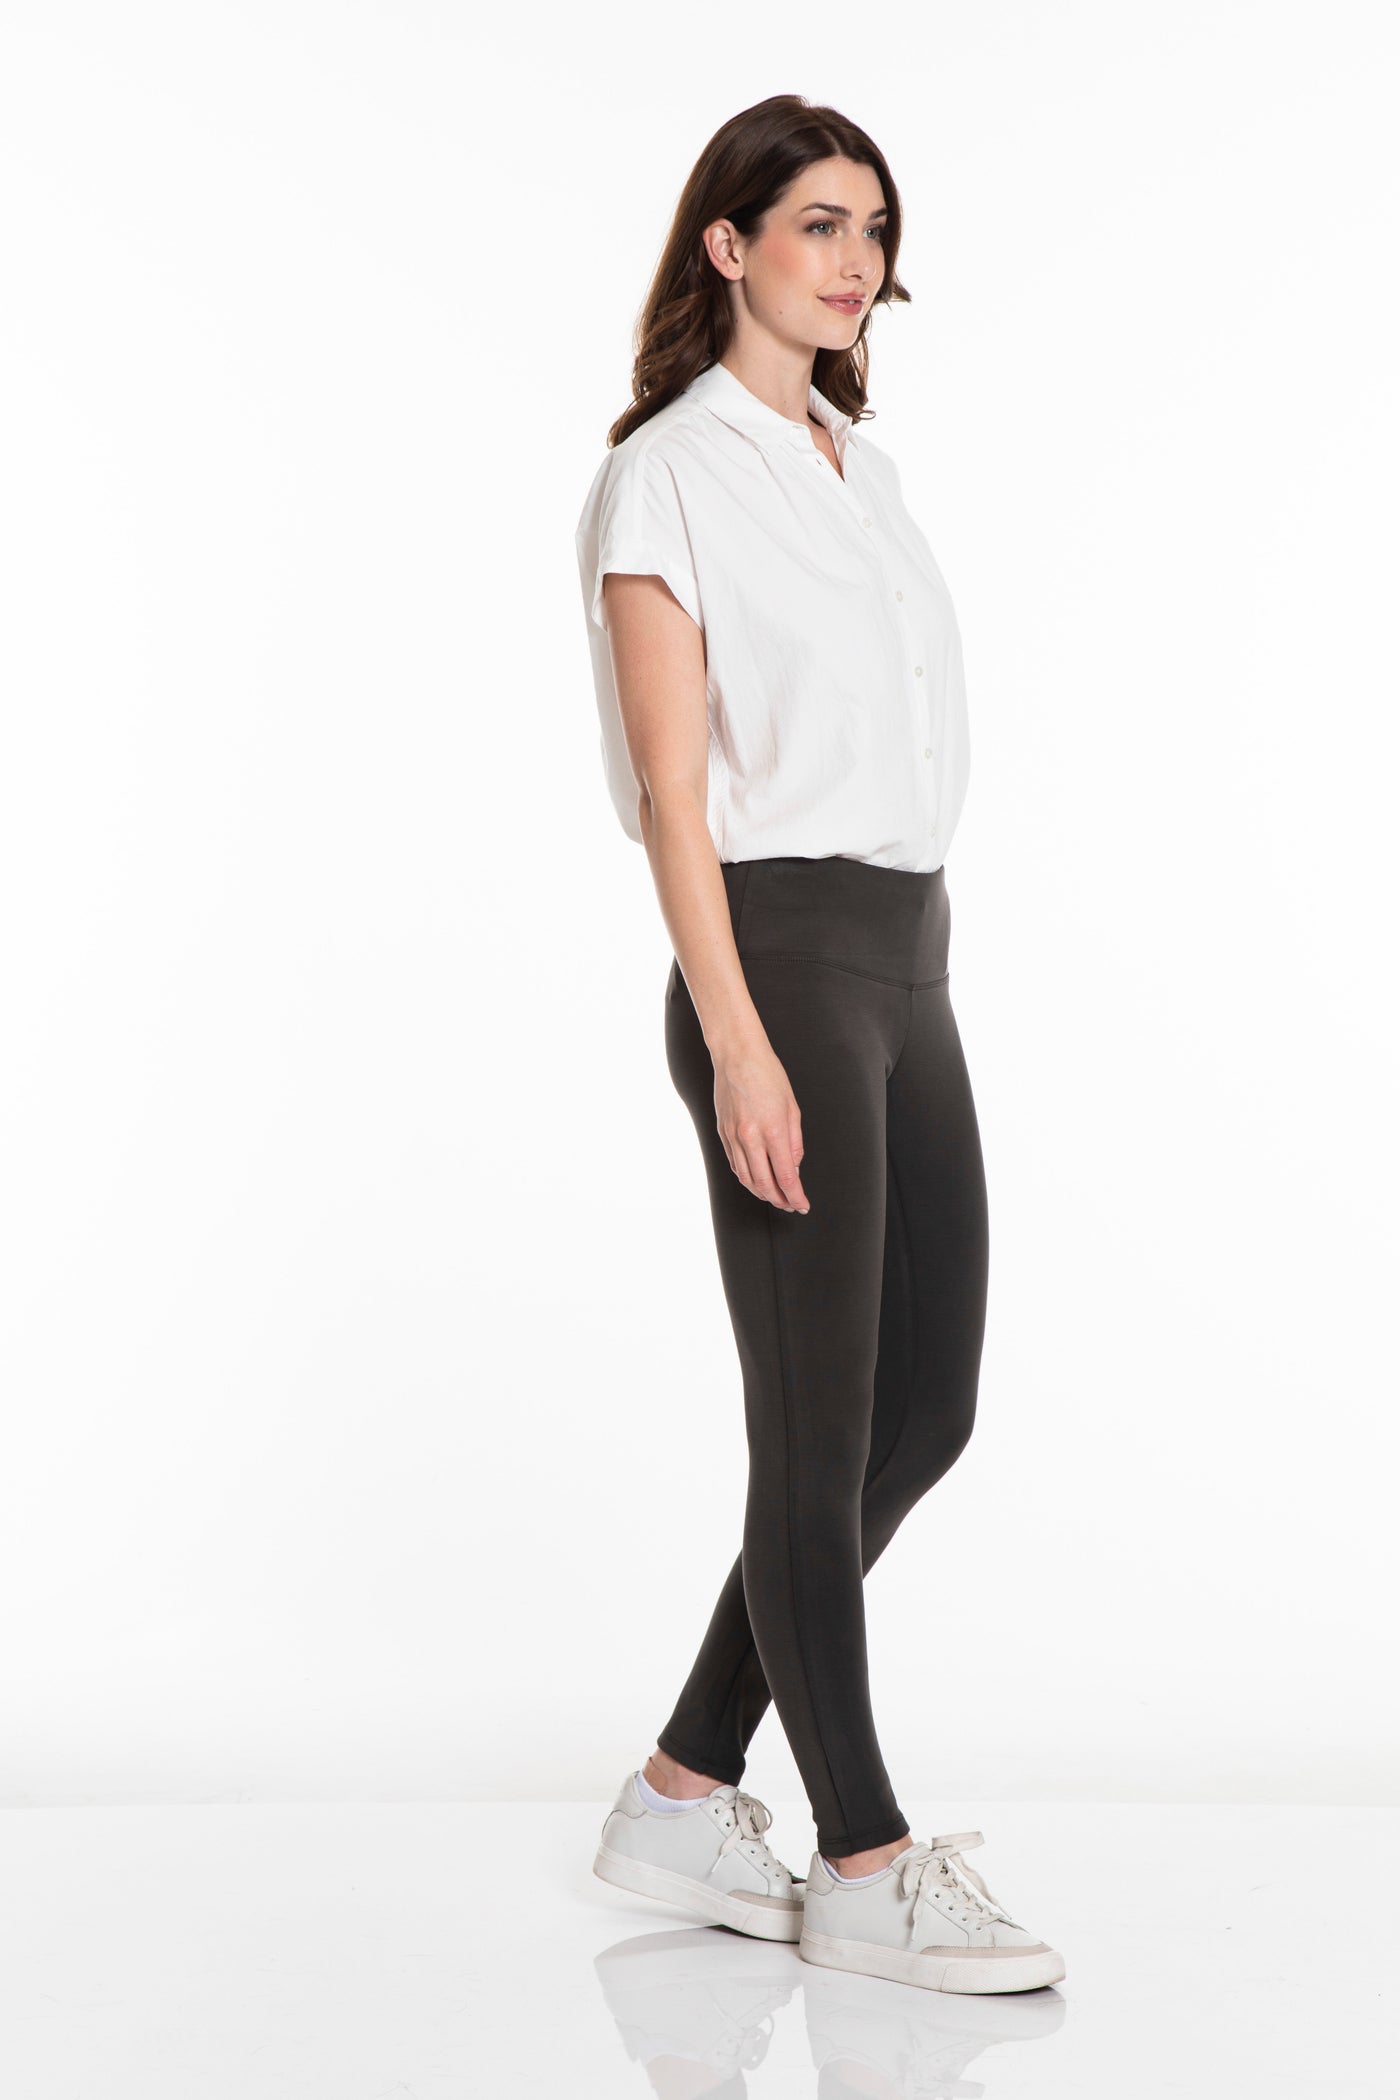 WIDE BAND PULL-ON ANKLE LEGGING - Deep Charcoal